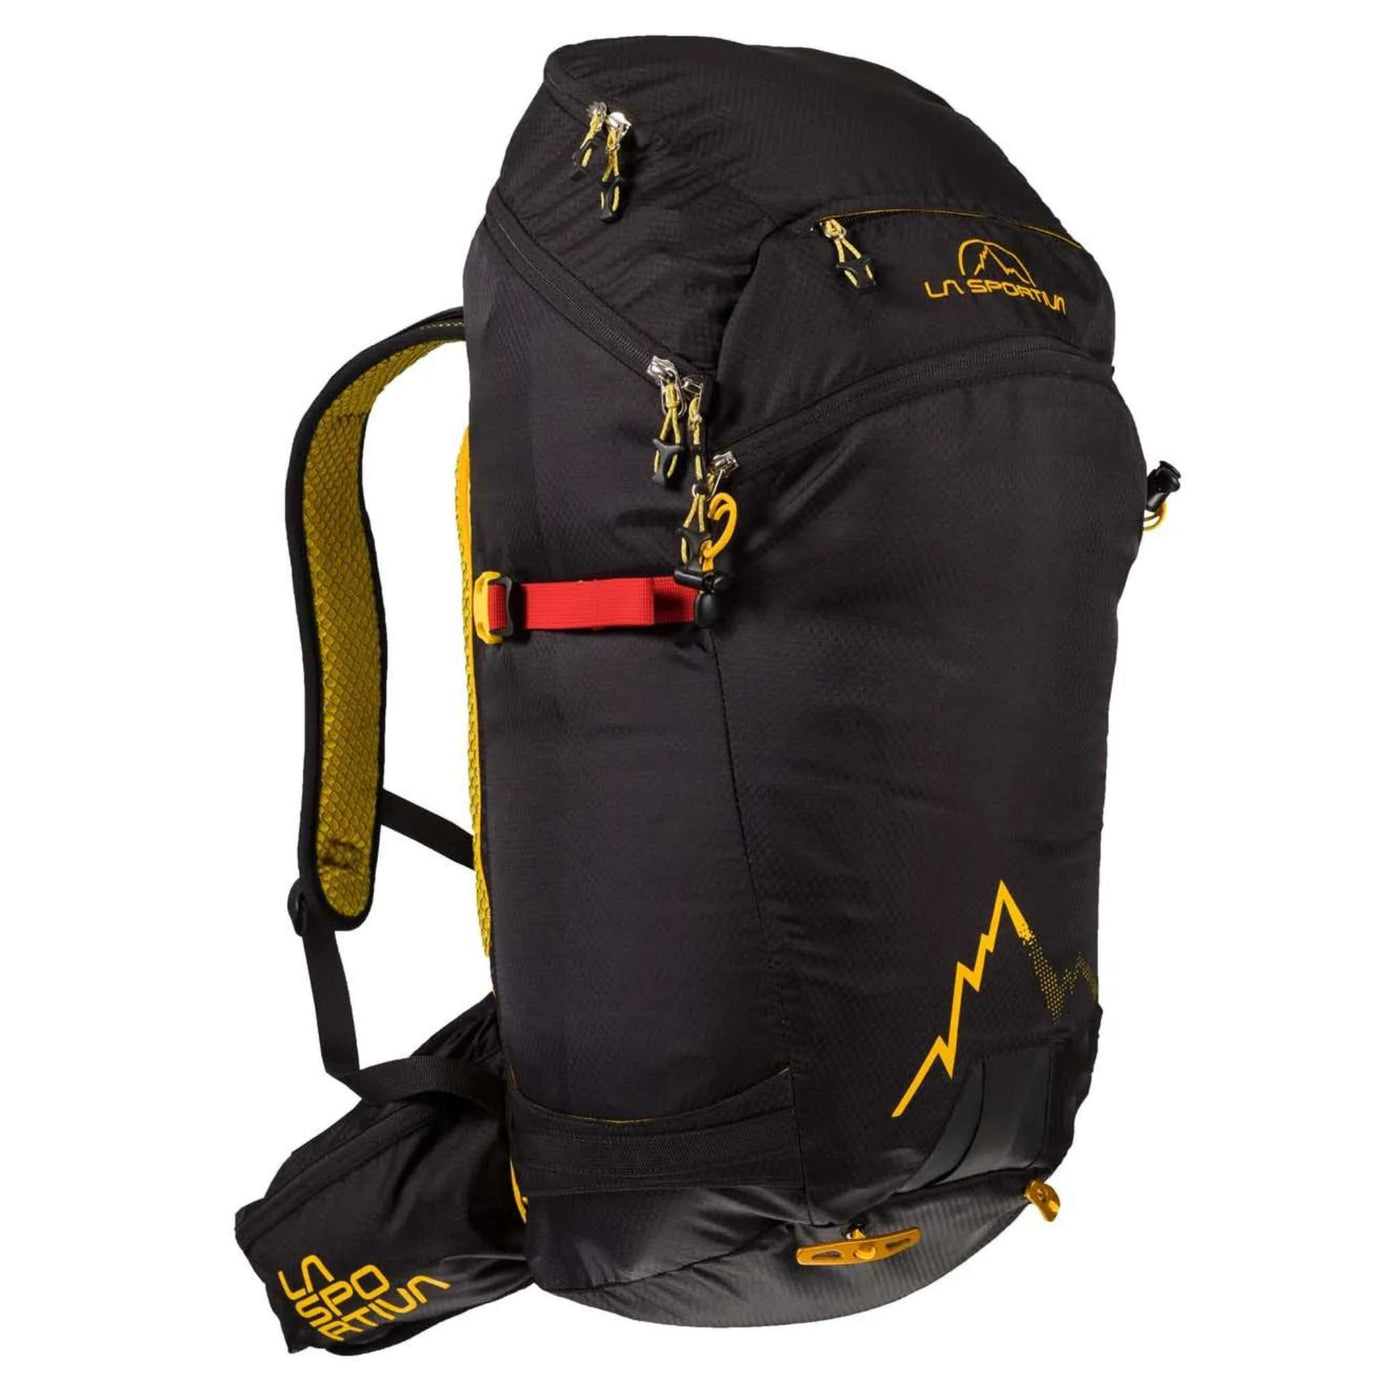 La Sportiva Backpack Sunlite - 40L | Ski Mountaineering Backpack NZ | Further Faster Christchurch NZ #black-yellow 